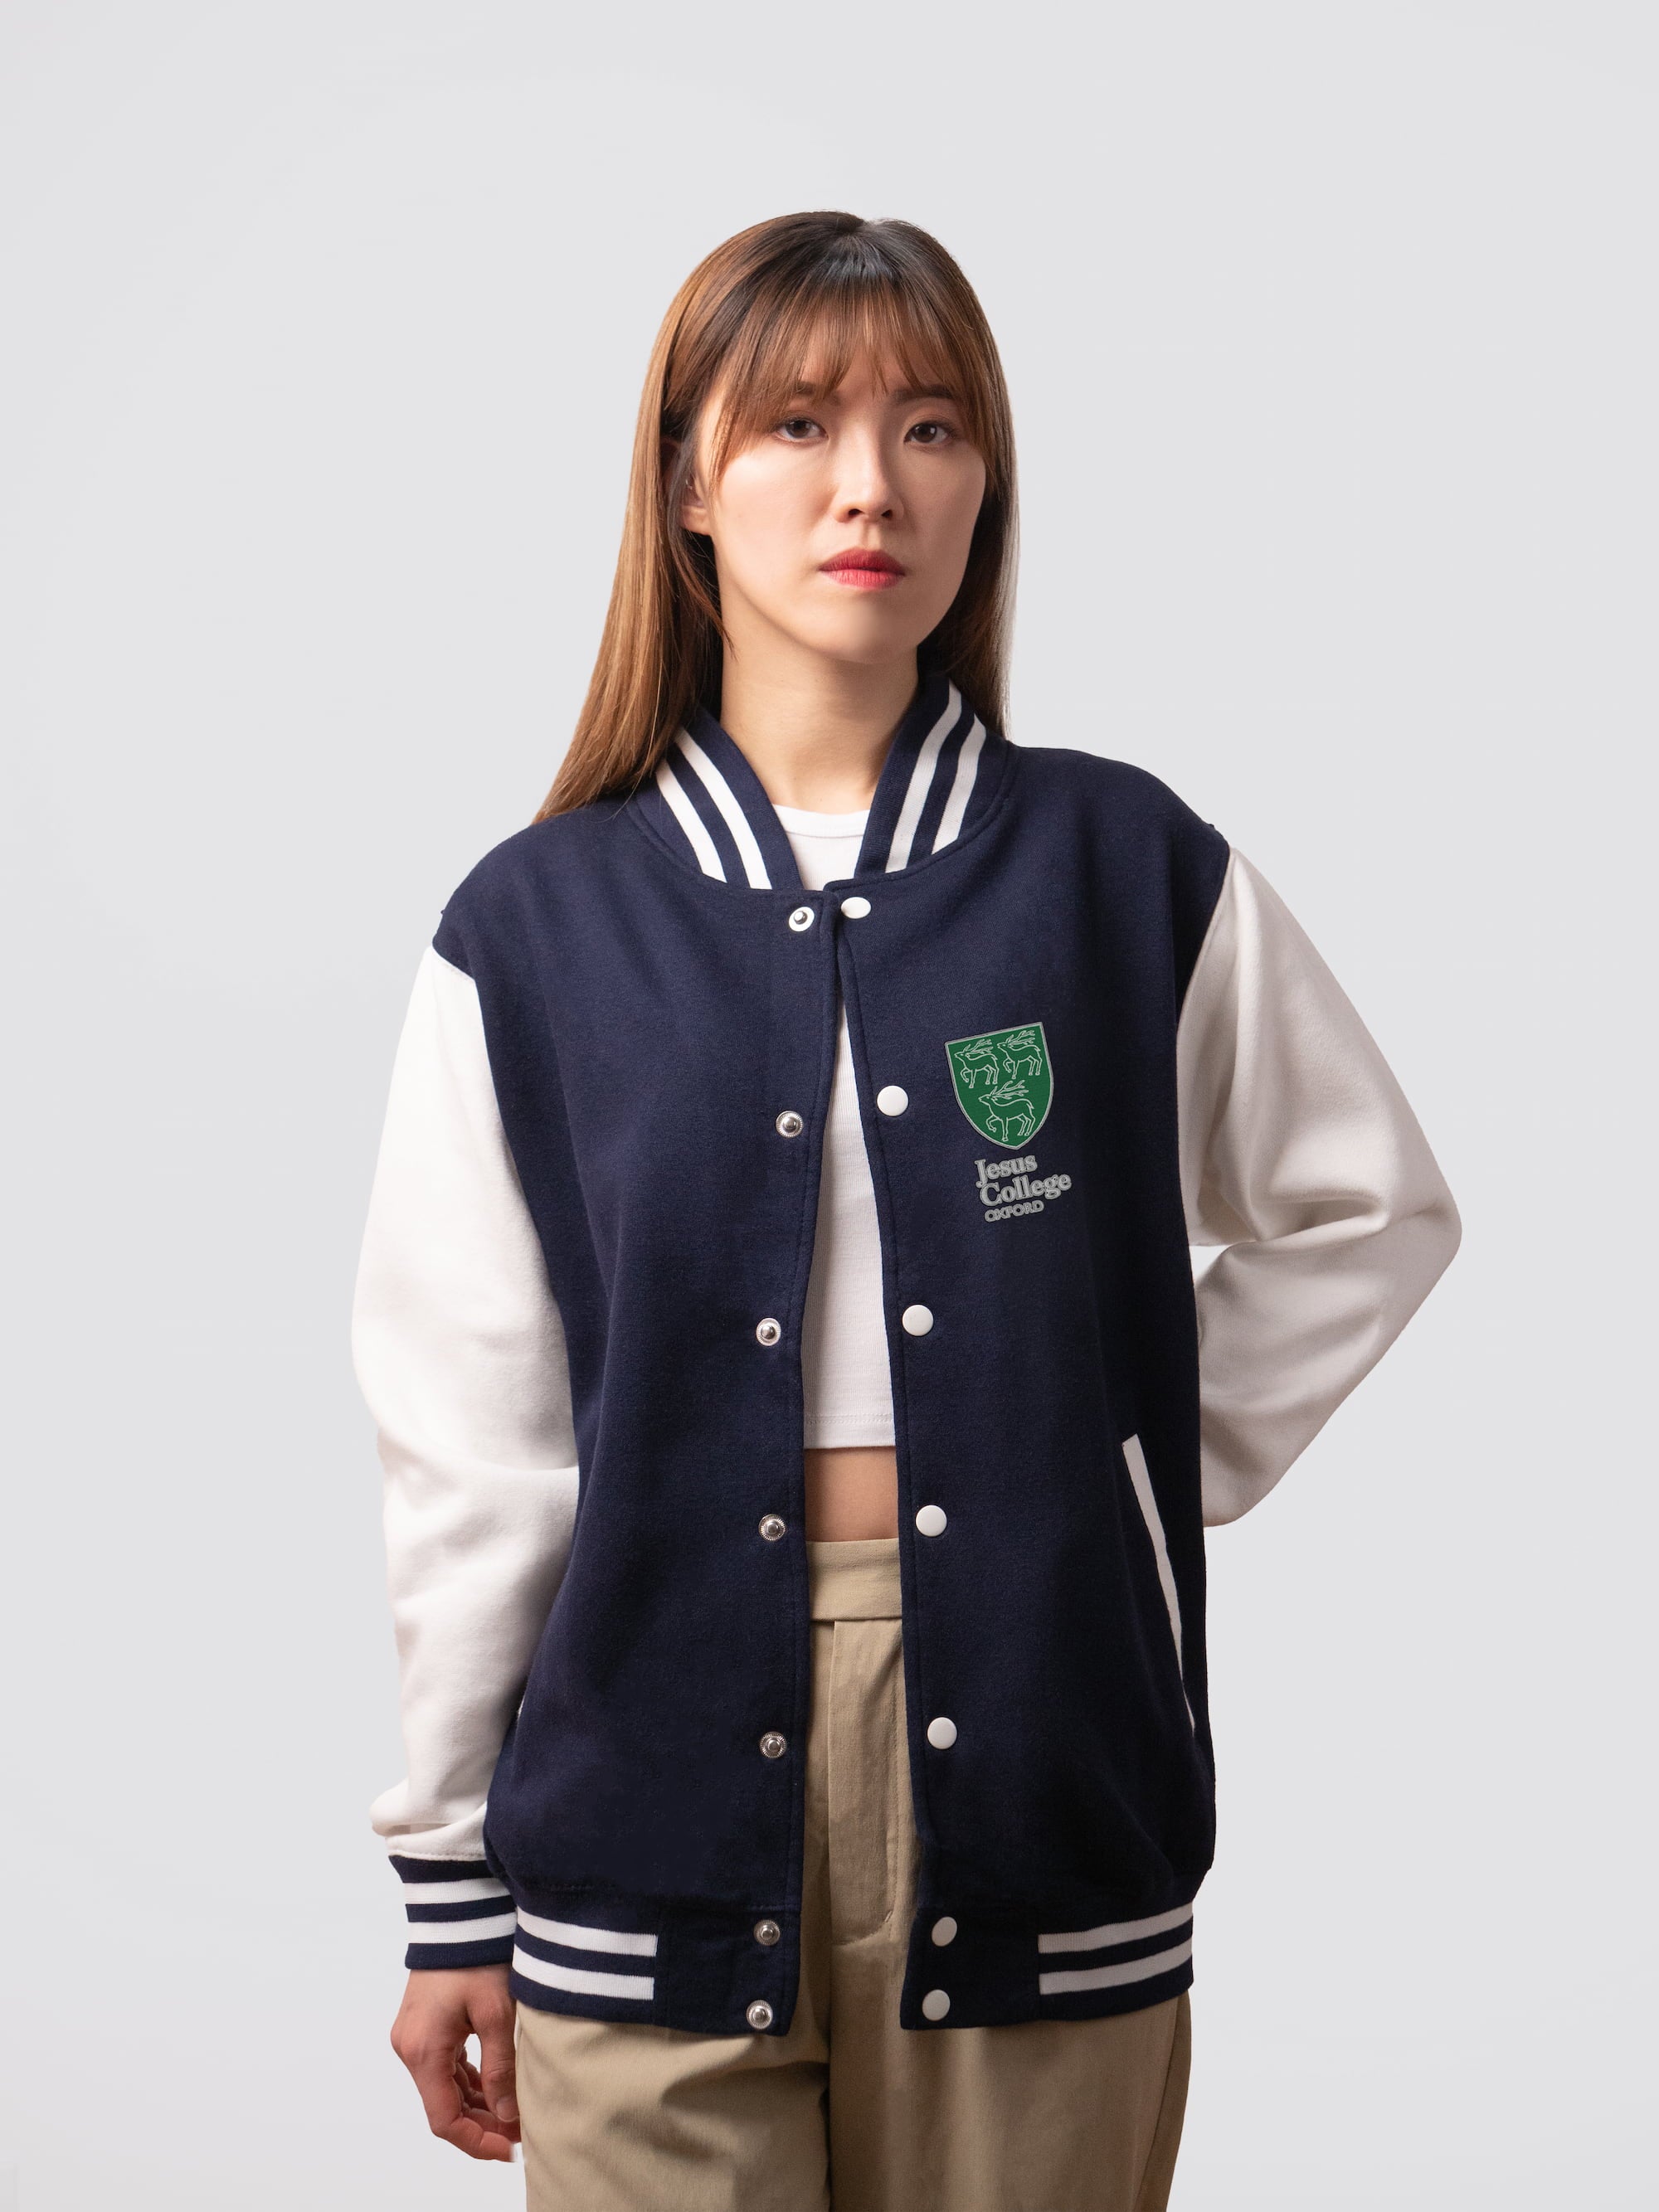 Retro style varsity jacket, with embroidered Jesus College crest